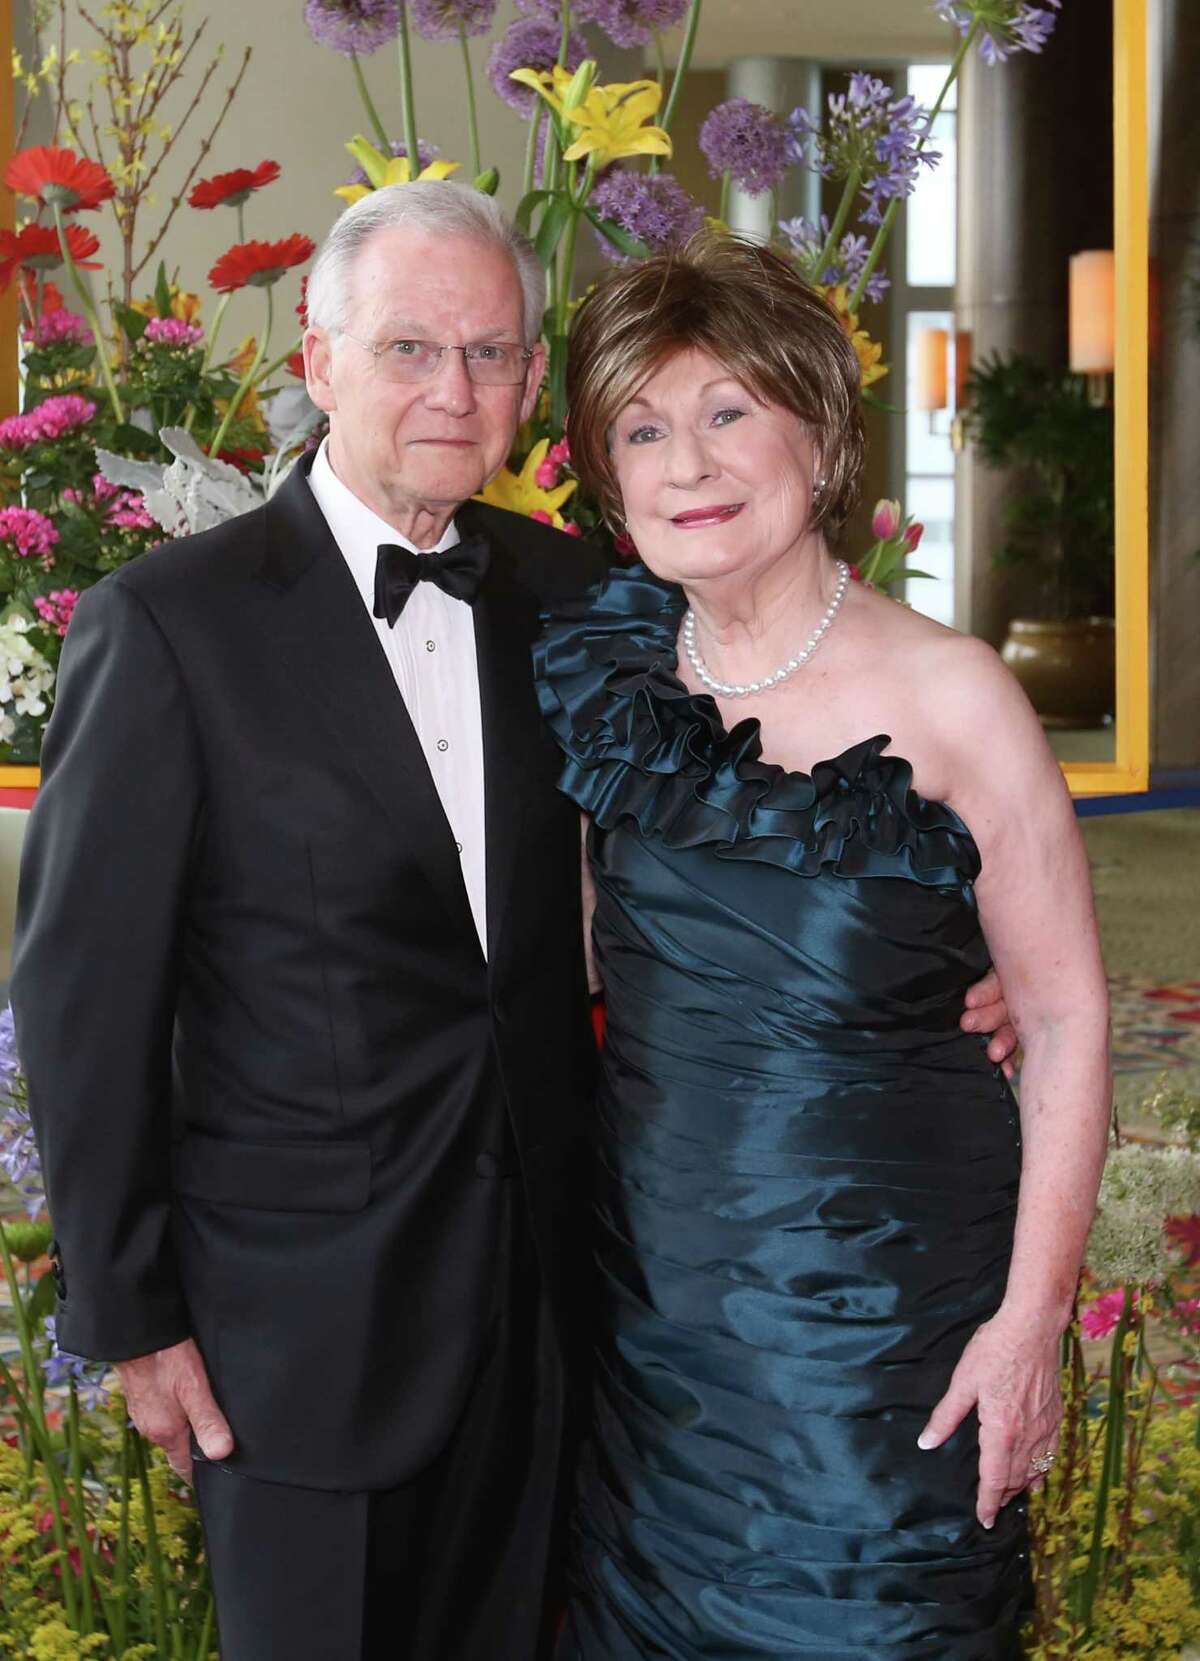 Harry and Cora Sue Mach at the 2015 Houston Symphony Ball at the Hilton Americas Hotel.